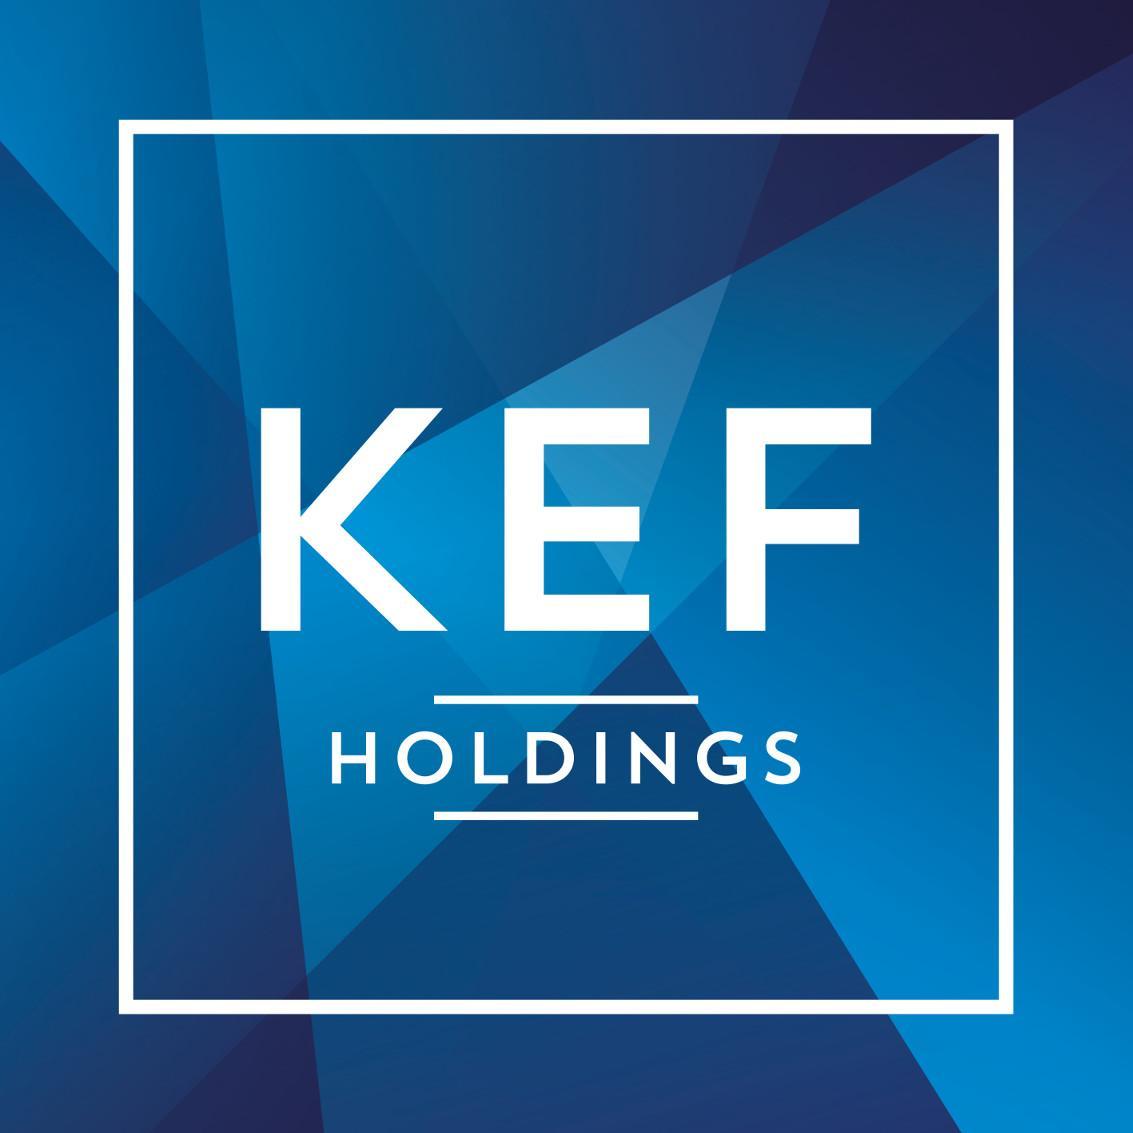 KEF Holdings is a new era social enterprise established to solve some of the developing world’s most fundamental problems in infra, health, edu and agri